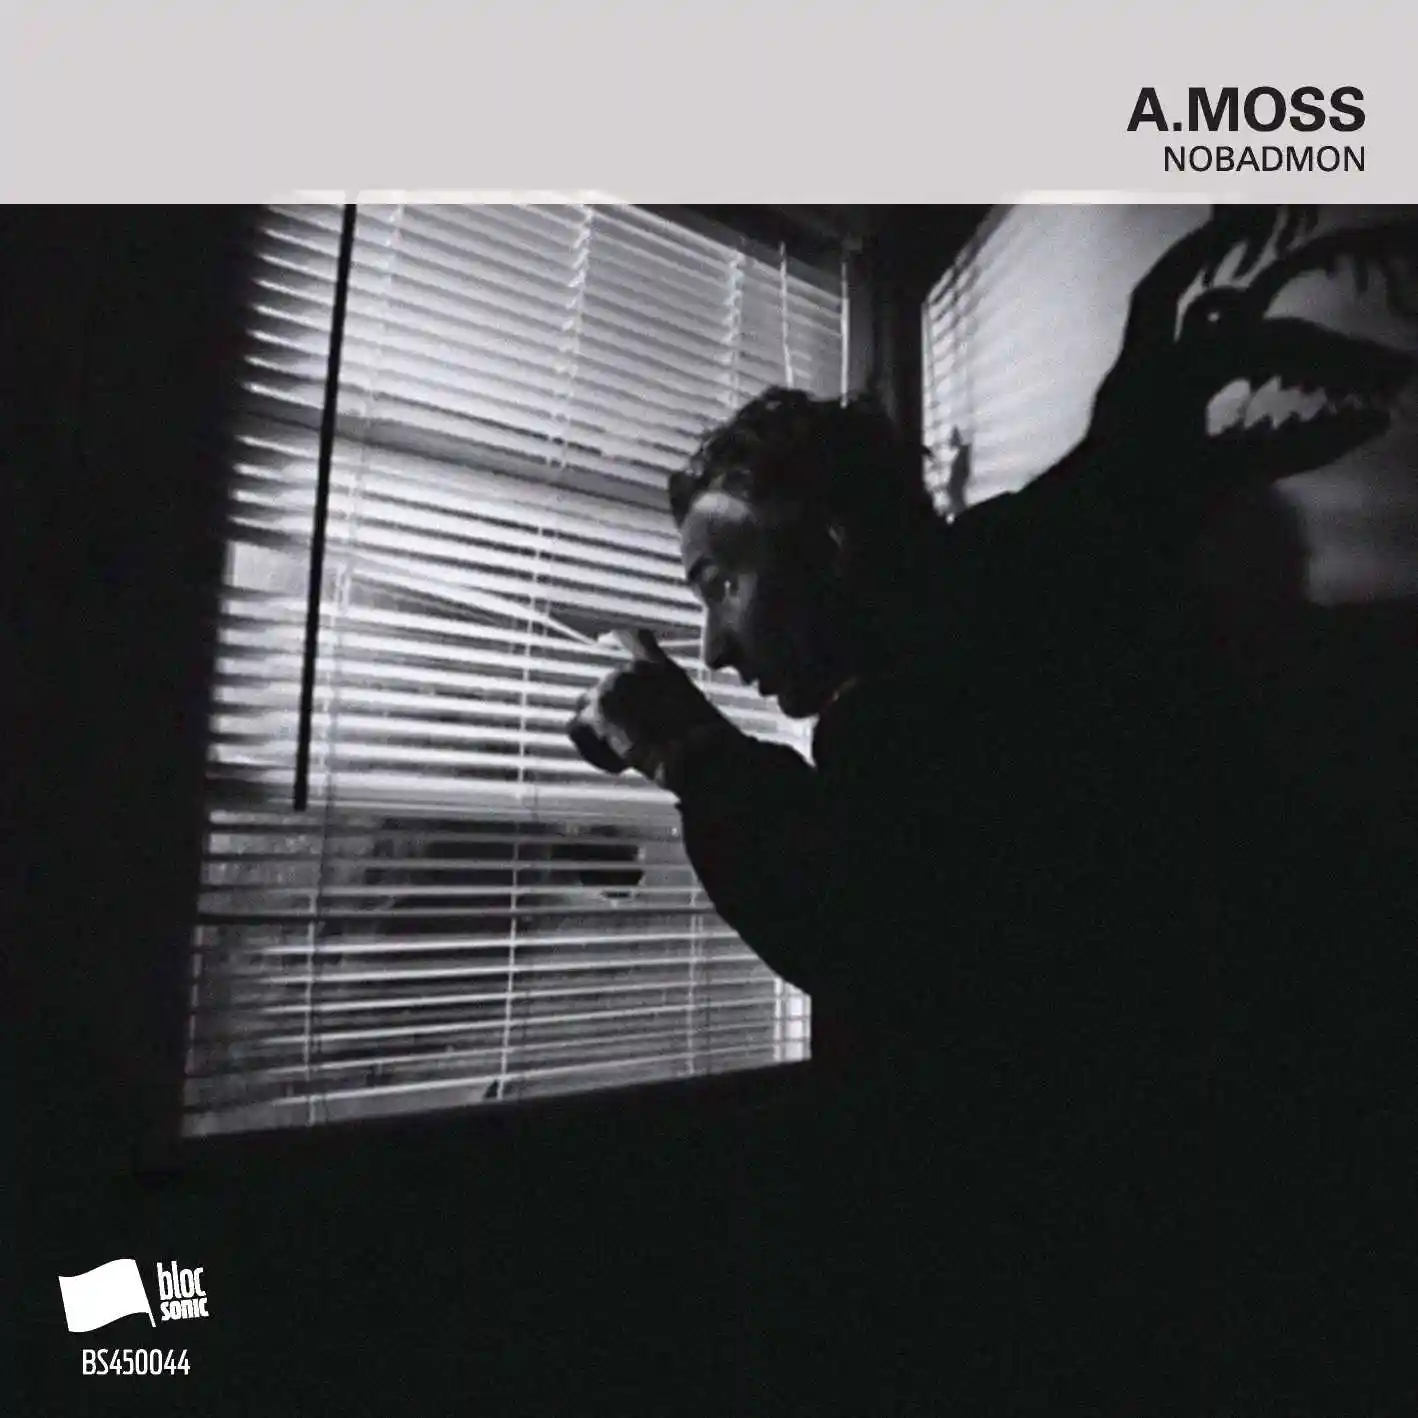 Album cover for “NOBADMON” by A.Moss